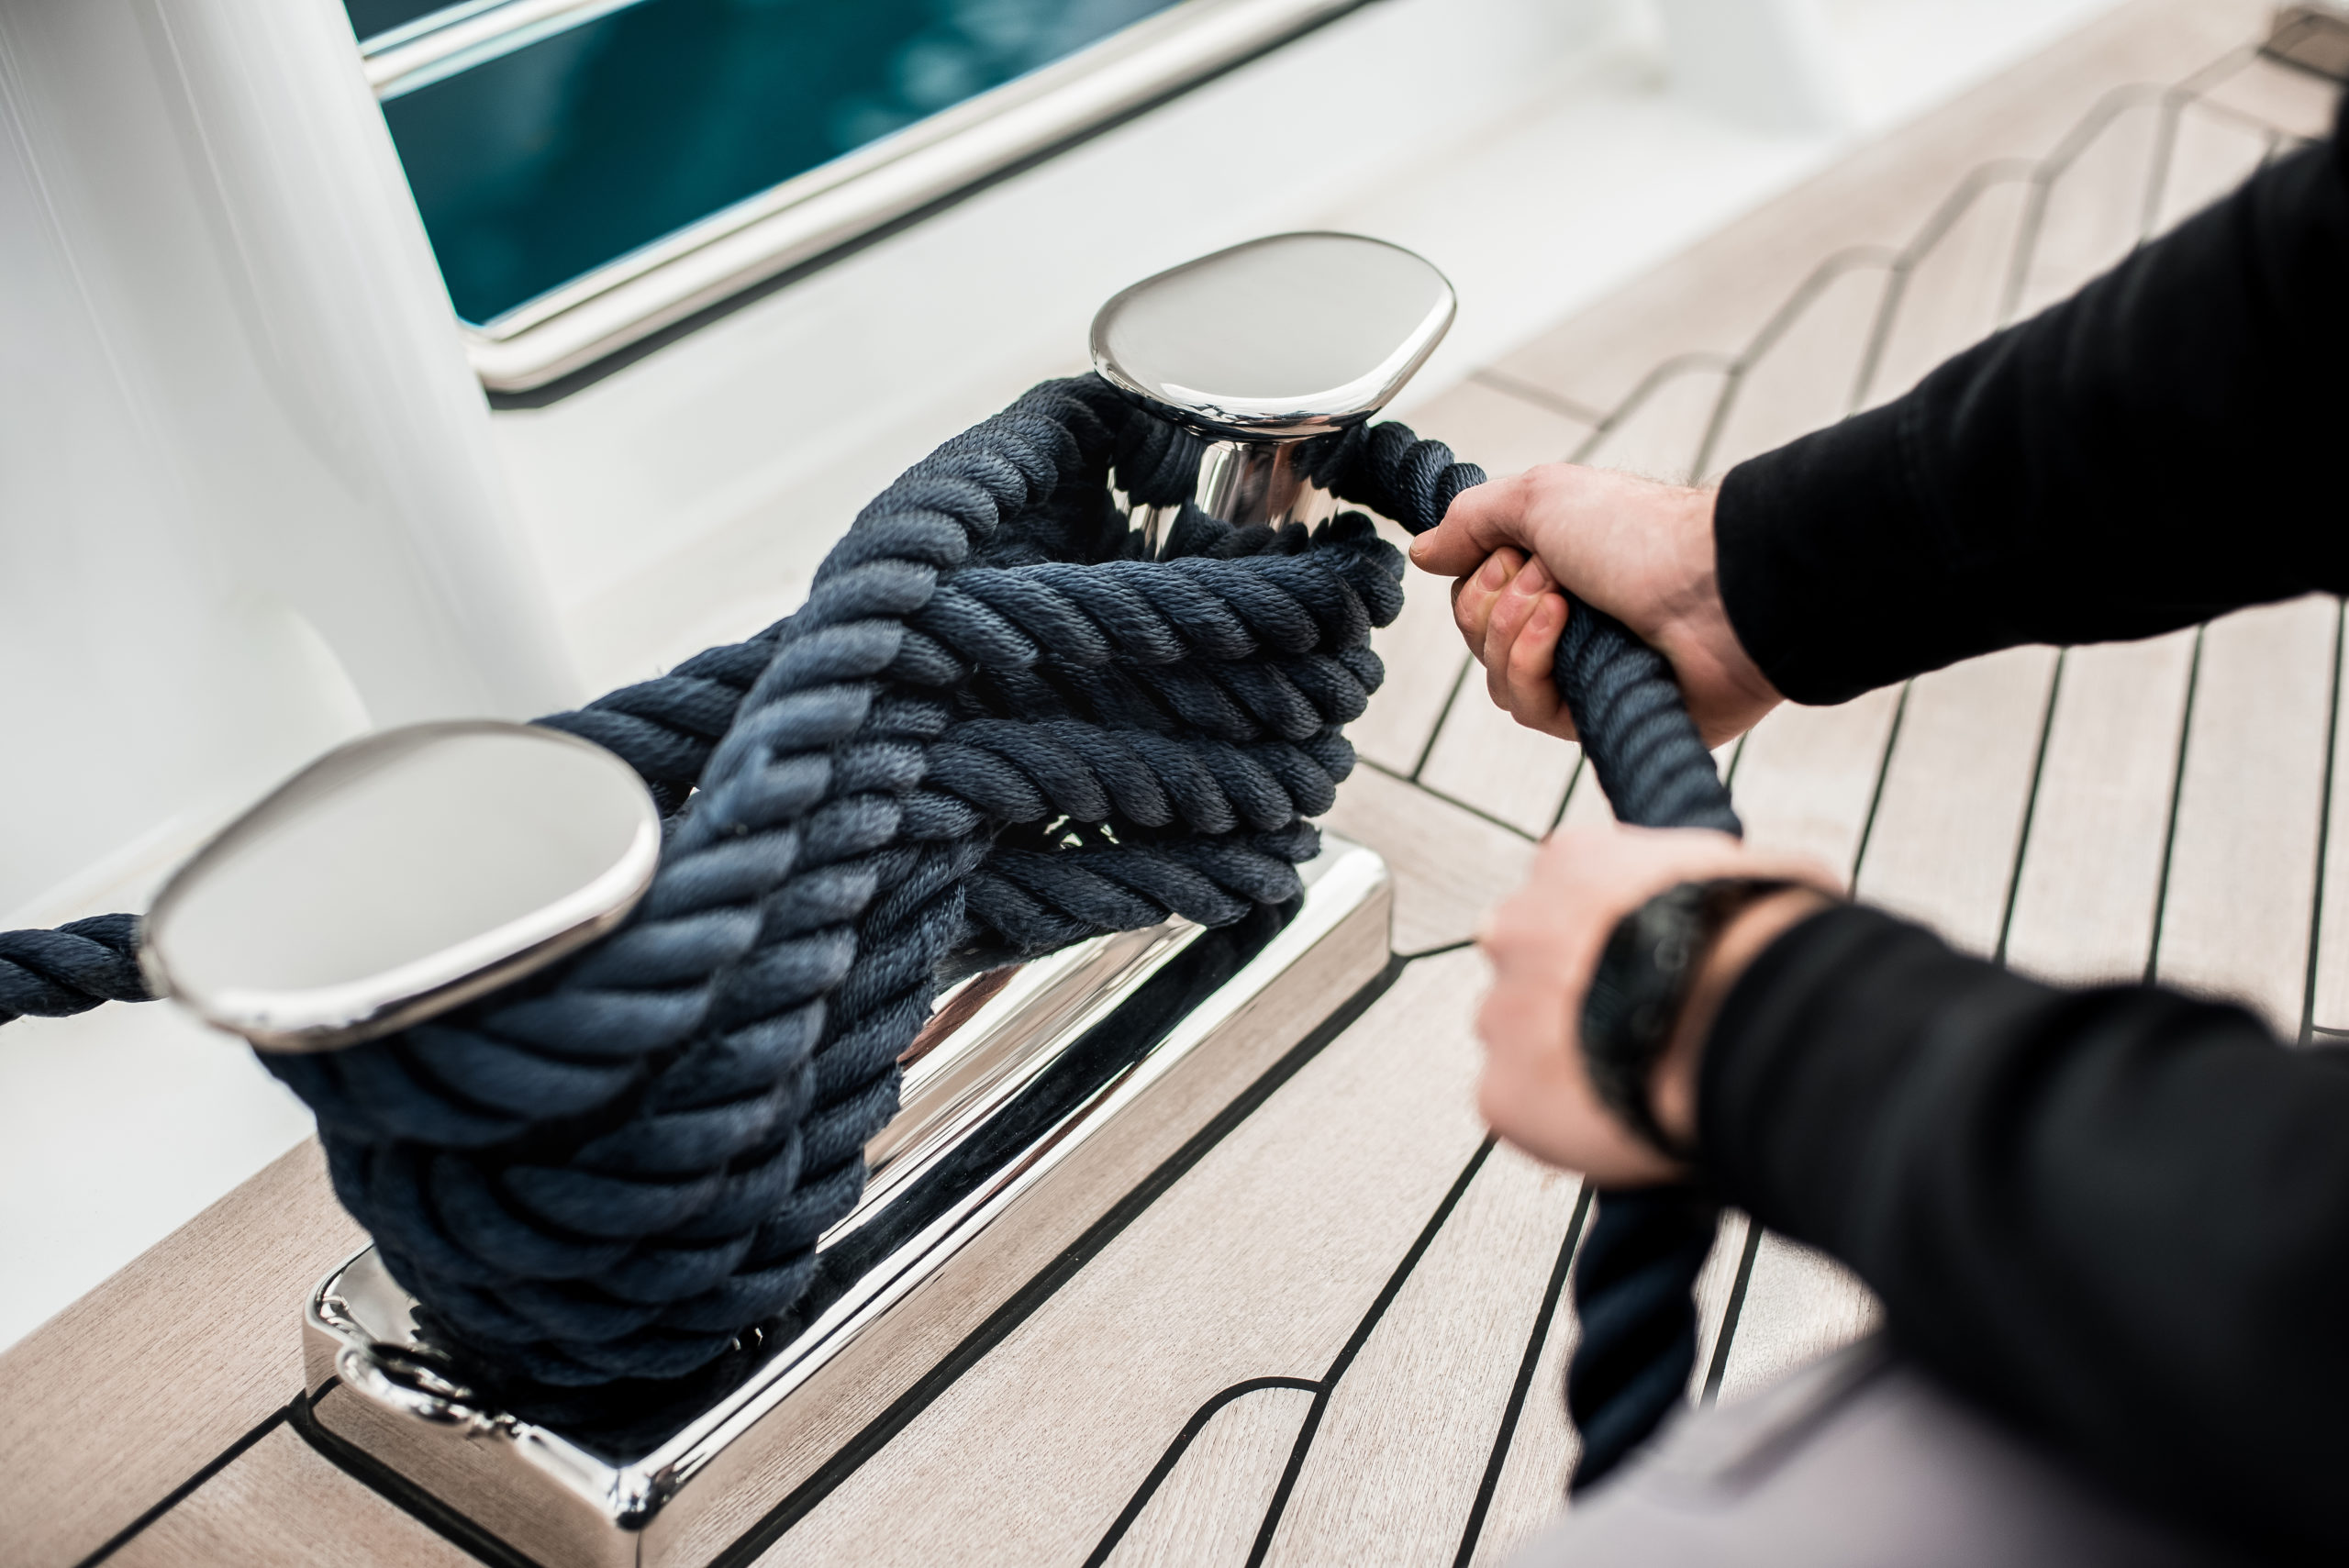 Detail,Of,Hands,Cleating,Off,Superyacht,Mooring,Lines,On,The